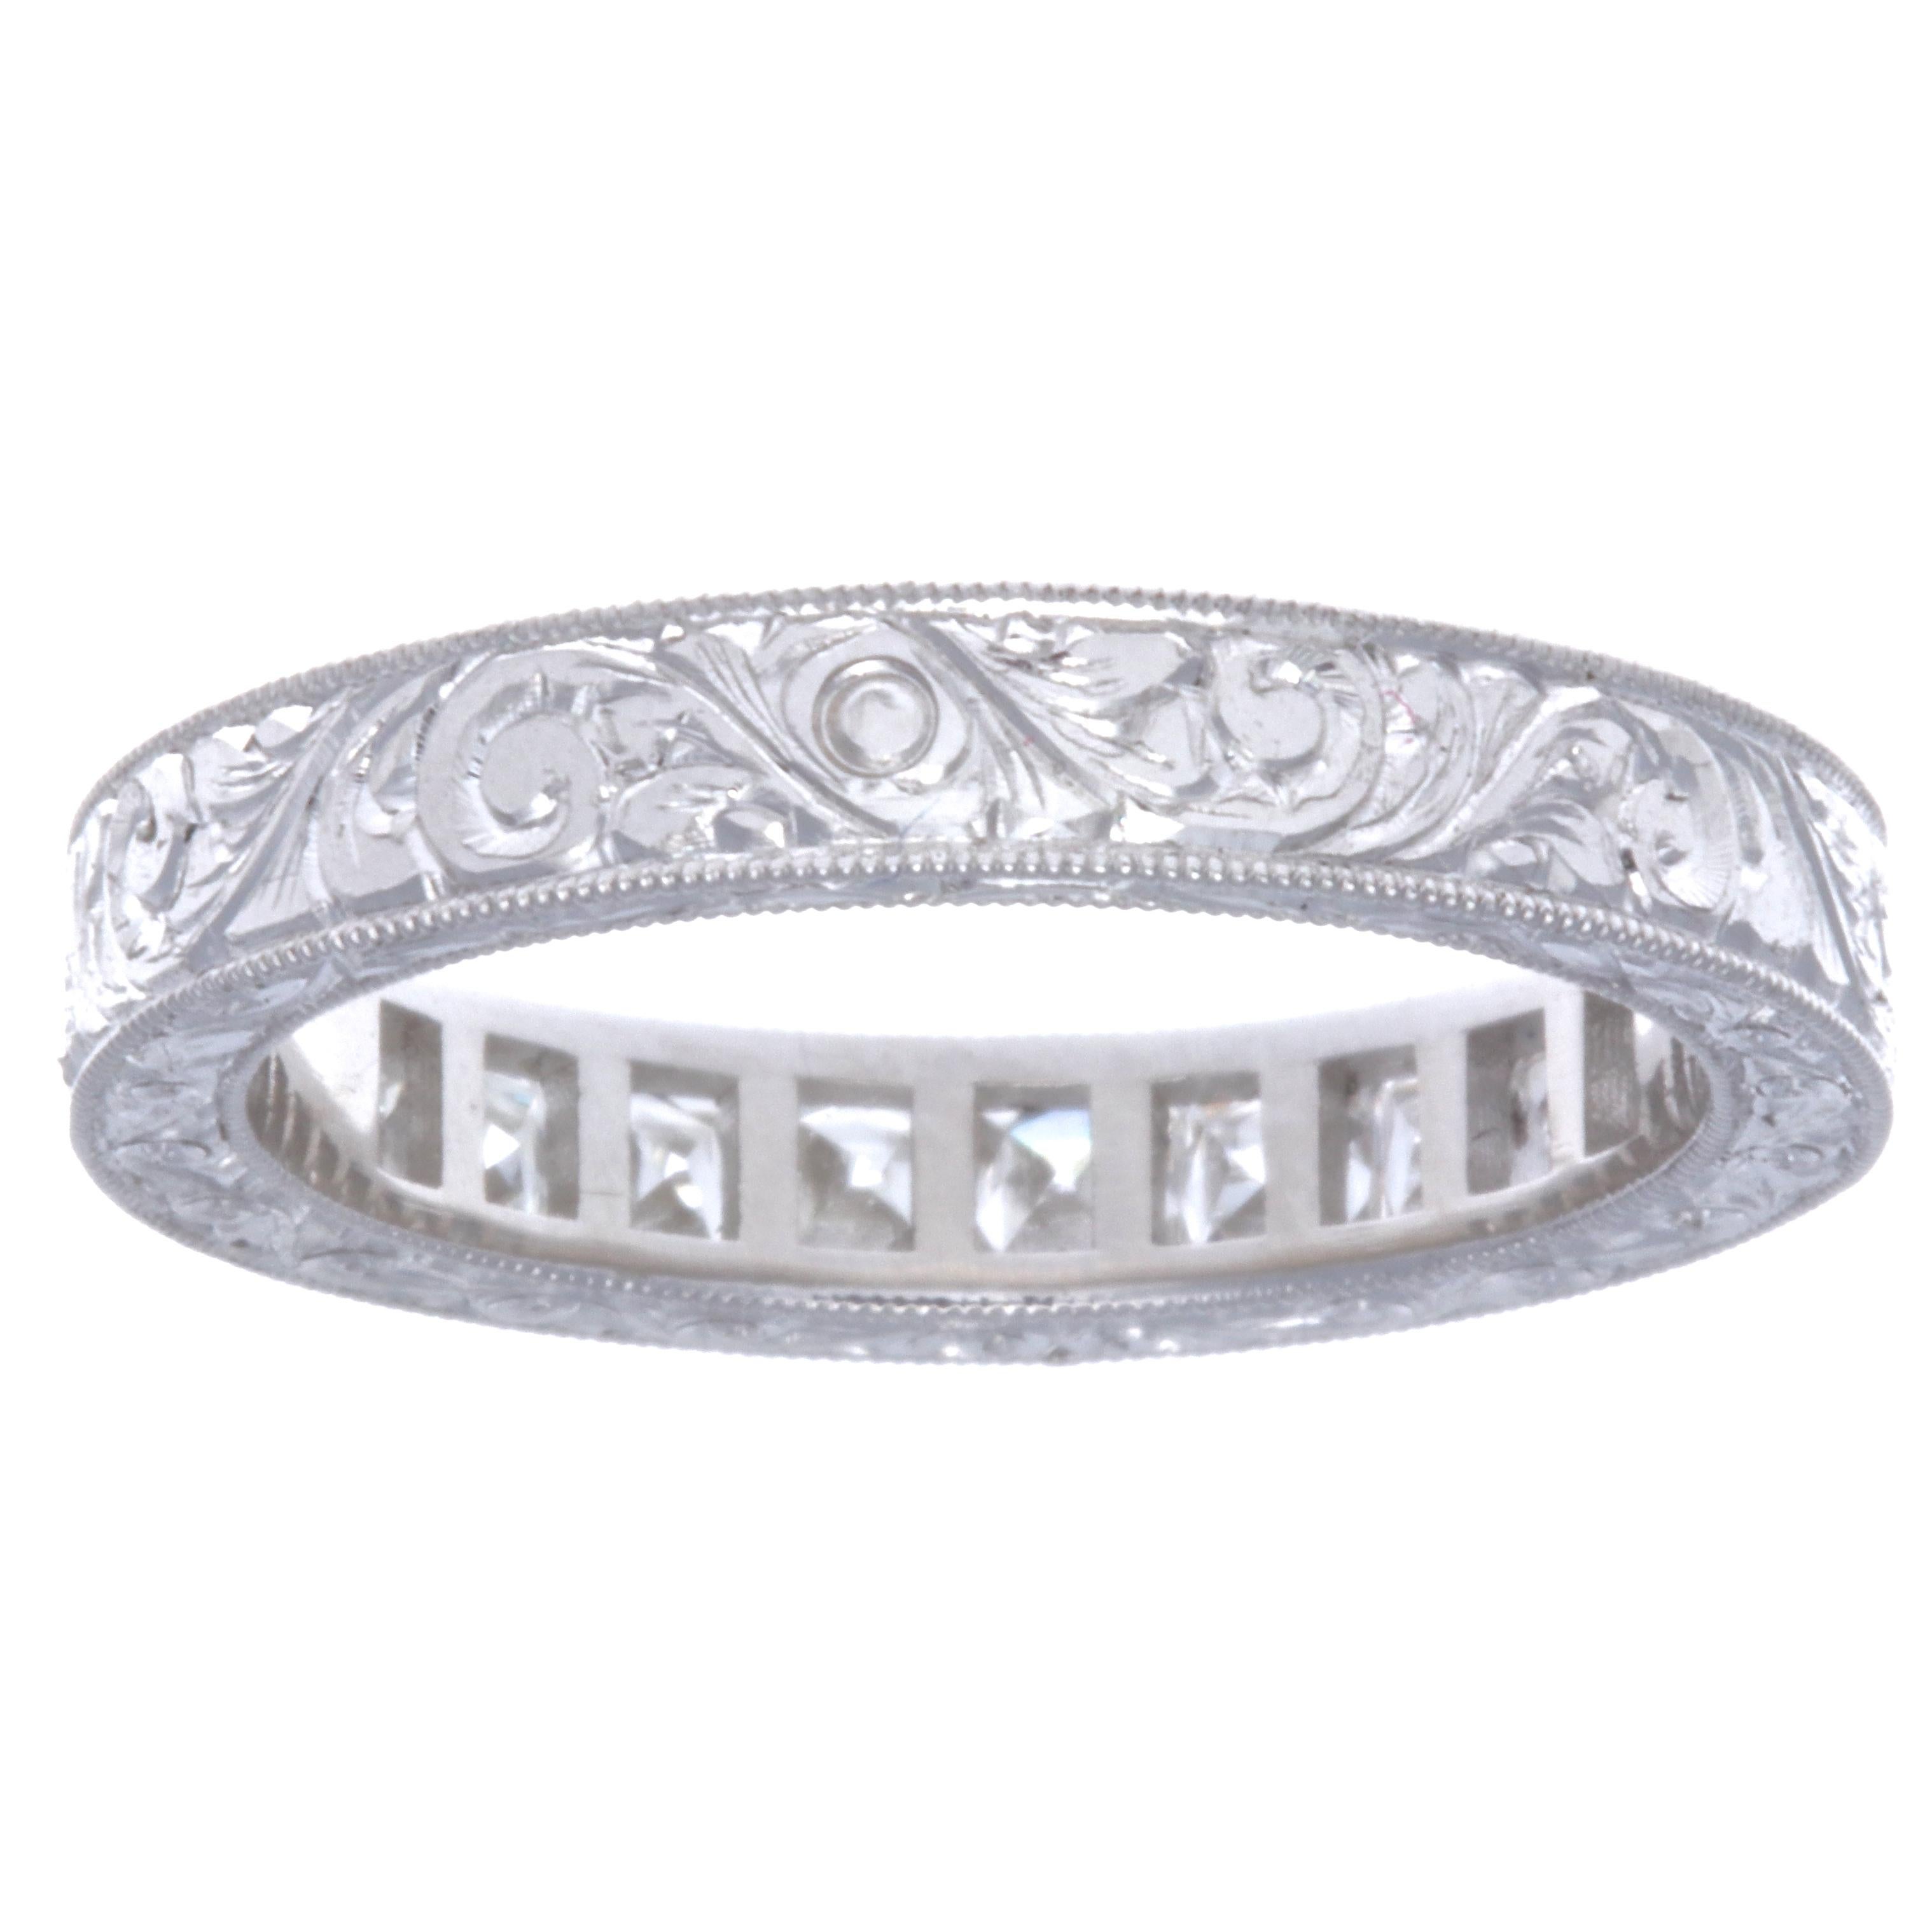 If you are looking for an eternity band, and would like to save some money, this diamond platinum half eternity band would be your best choice! The Art Deco revival finely filigreed  ring features 9 French cut diamonds weighing approximately 0.90